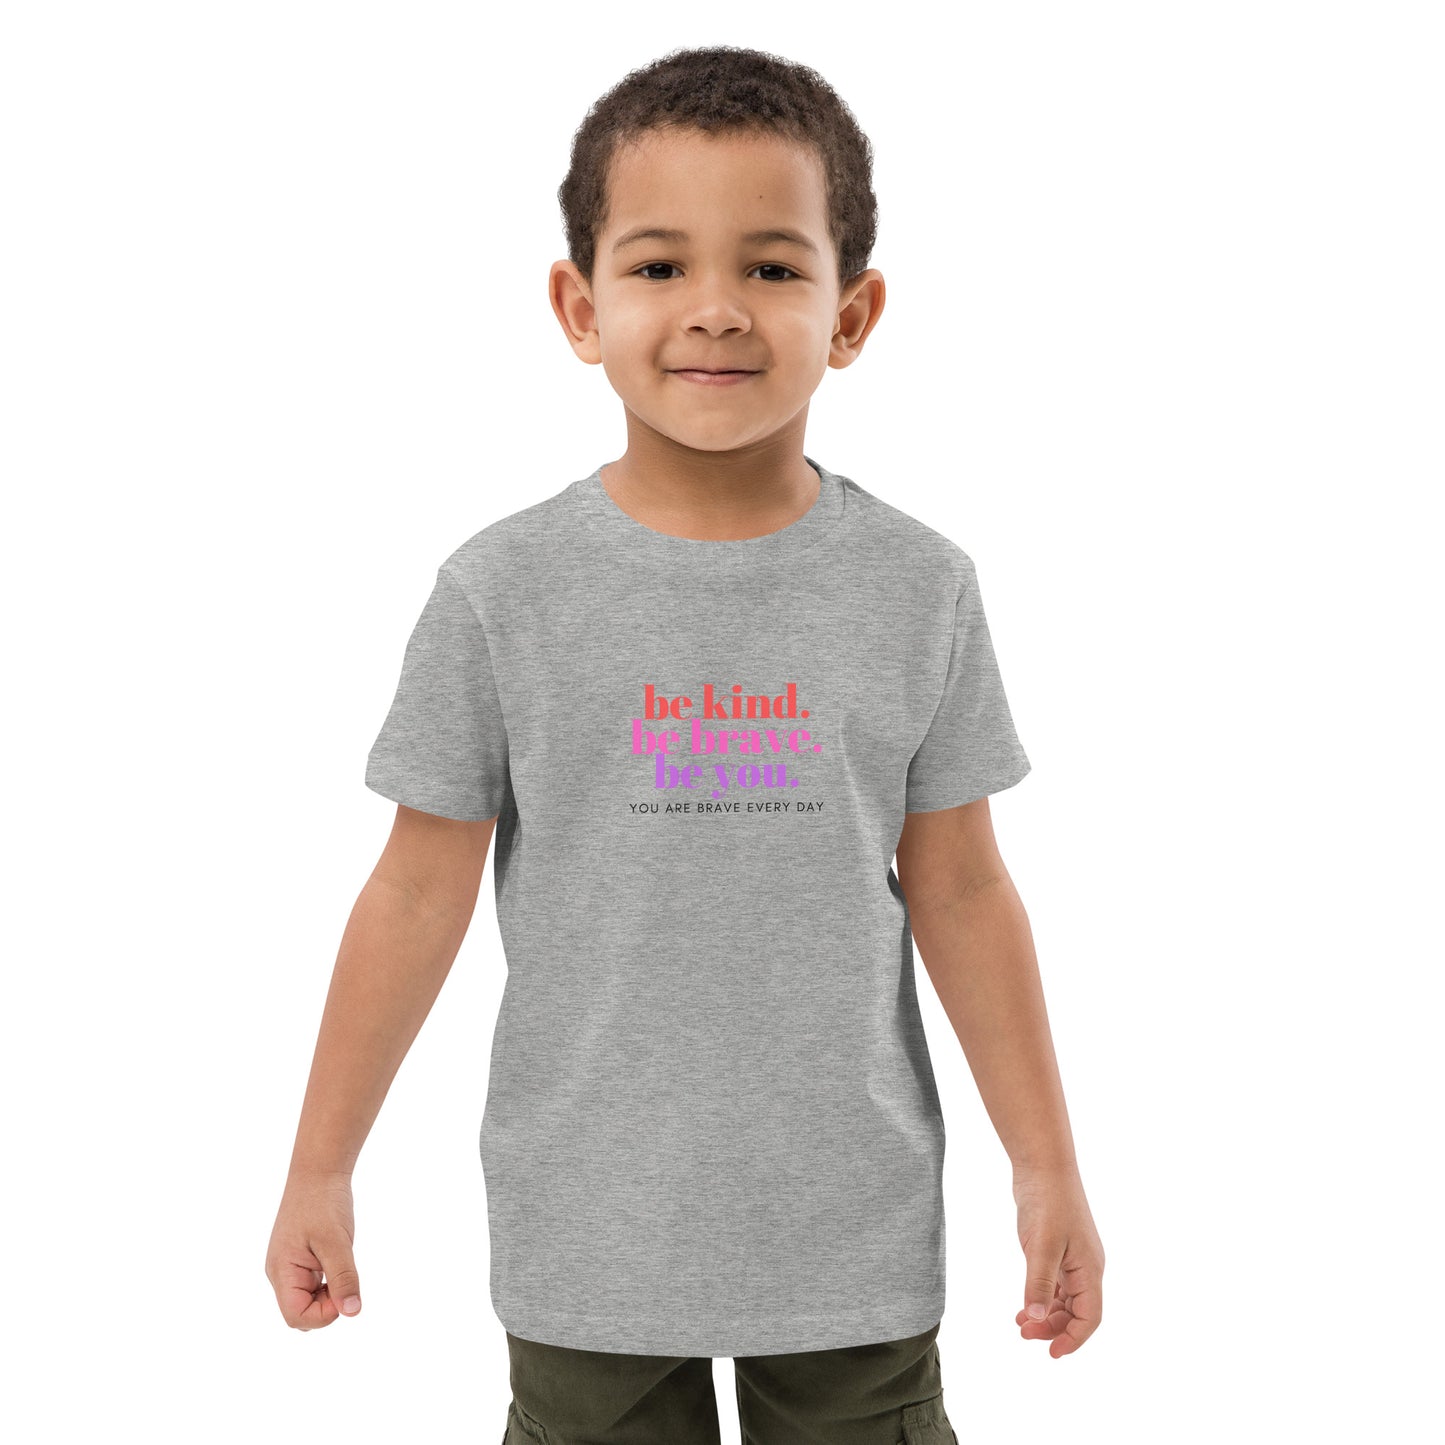 Organic cotton kids t-shirt - be kind. be brave. be you.